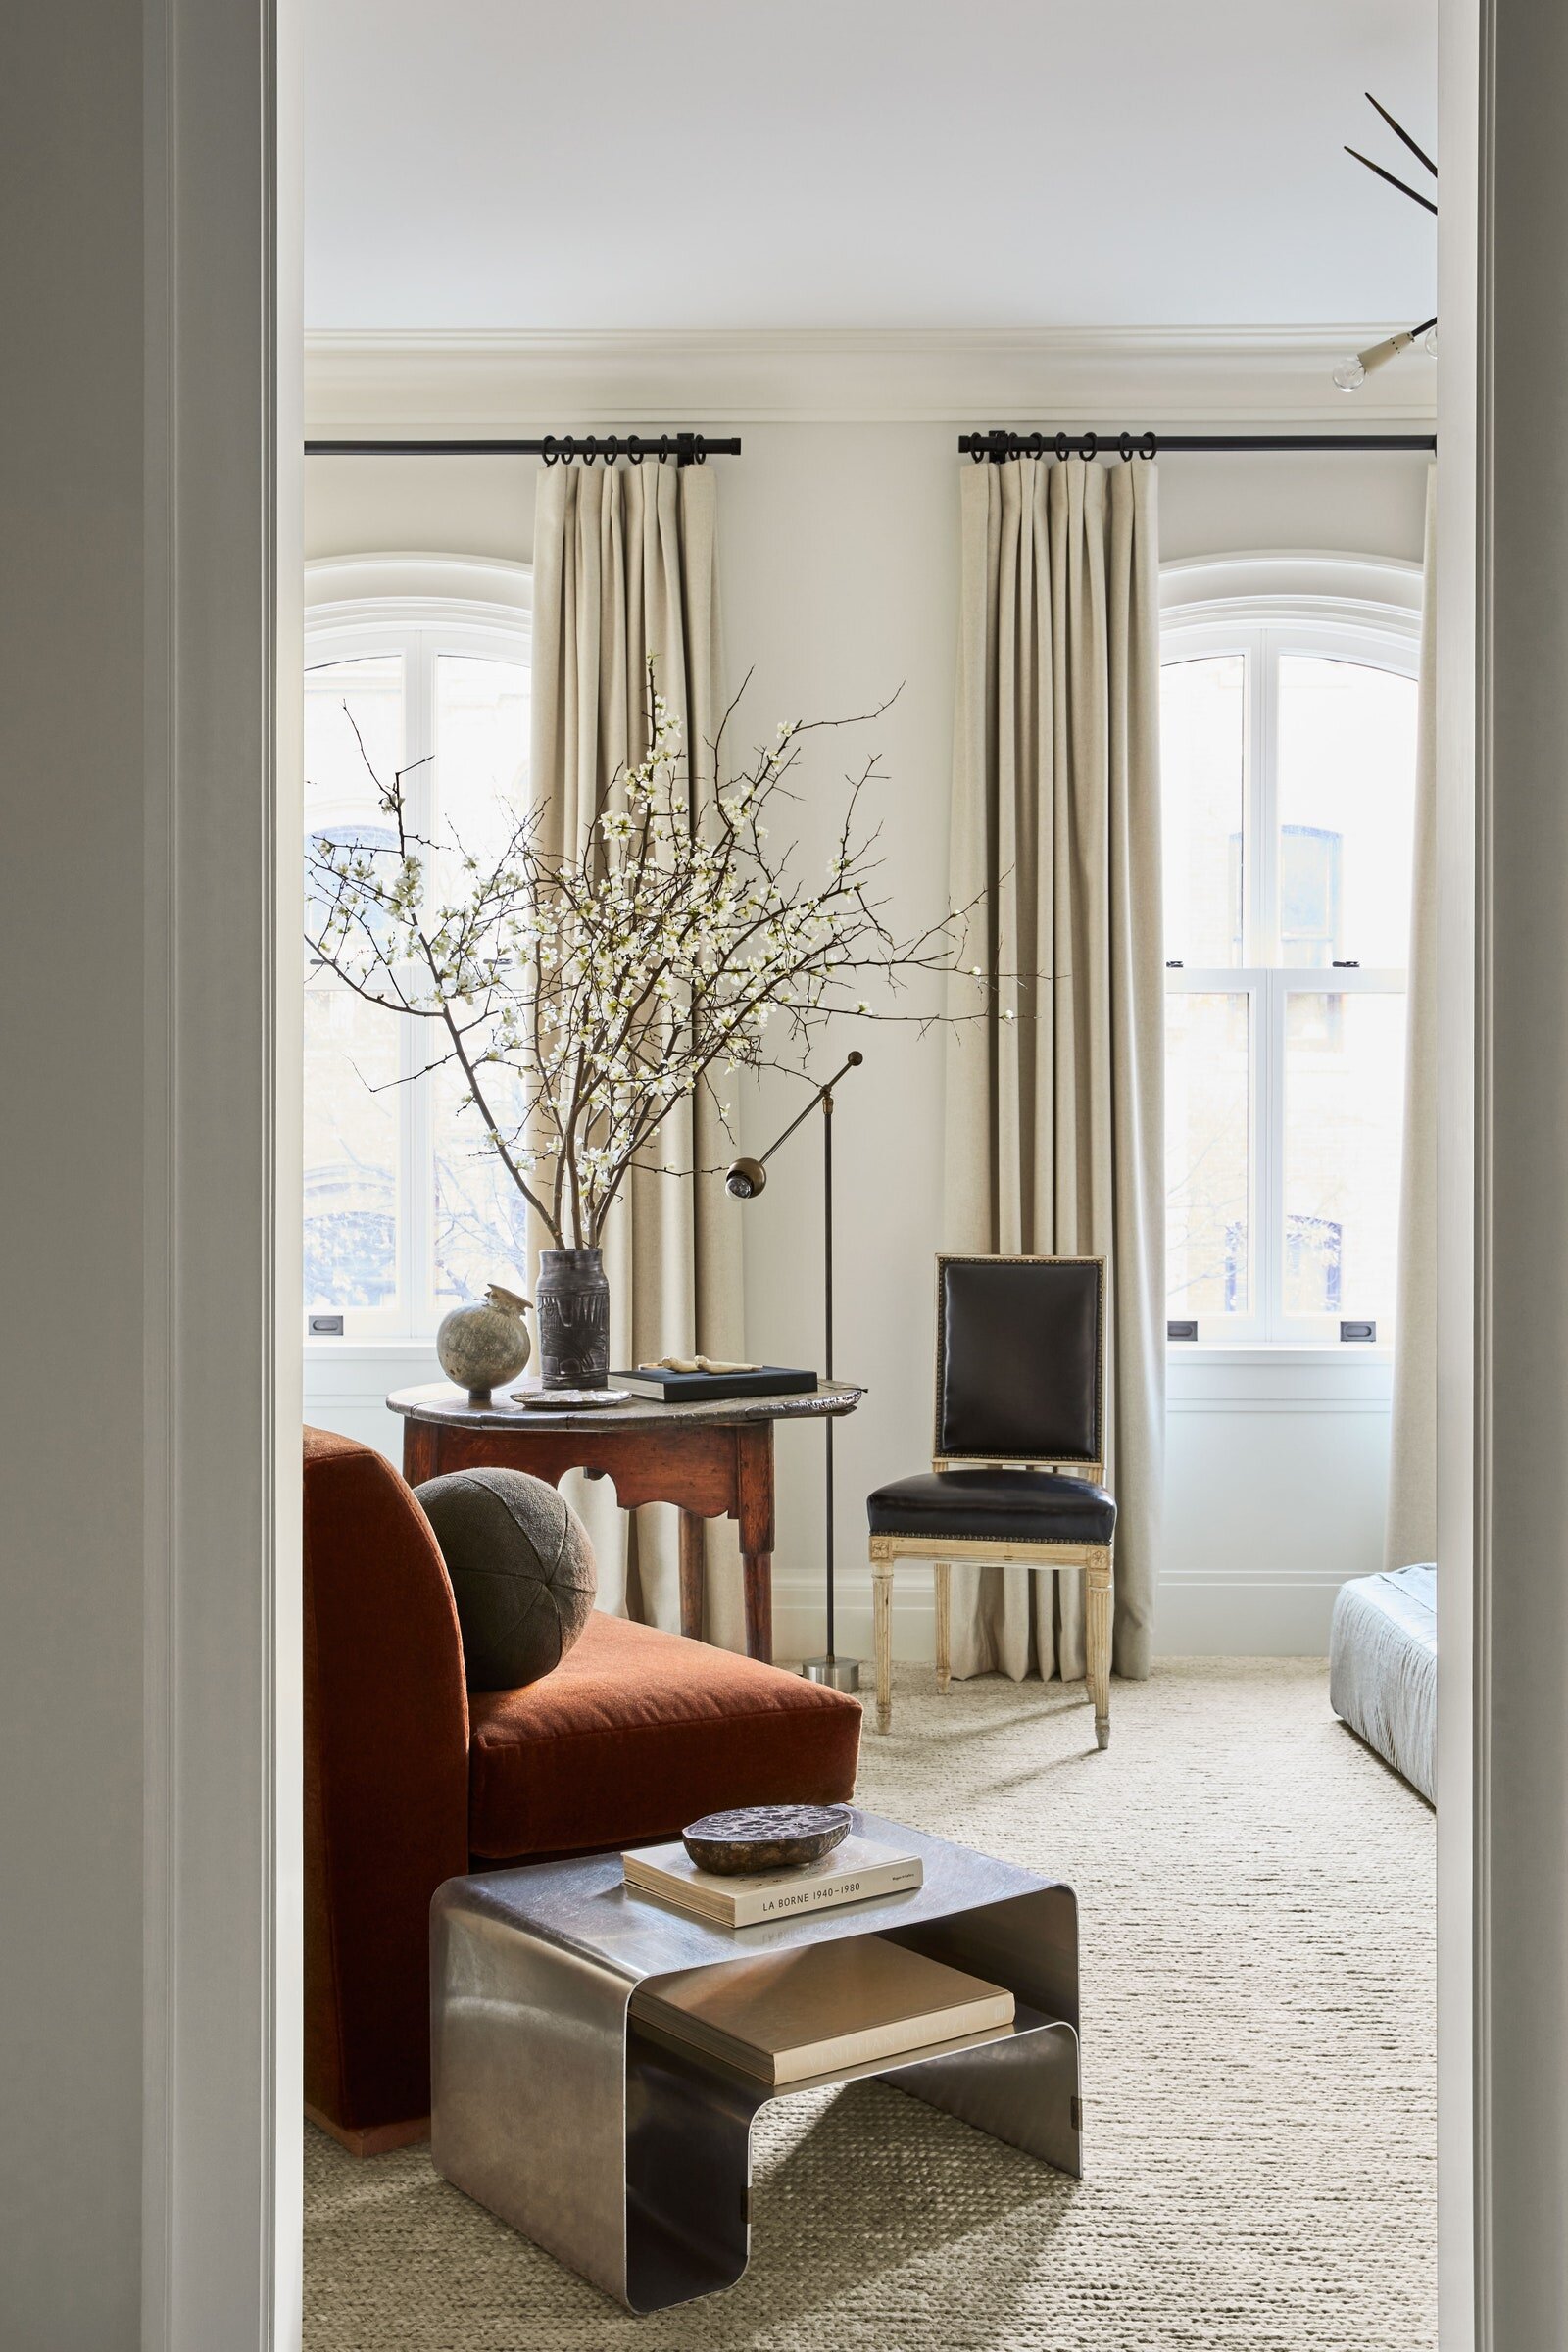 The High/Low List: French Country Edition - High end furniture and decor and budget friendly lookalikes. Furniture, curtains, wool rugs, and floor lamps at every price. | Nadine Stay (Image Source: Nate Berkus / Photographer: Nicole Franzen)